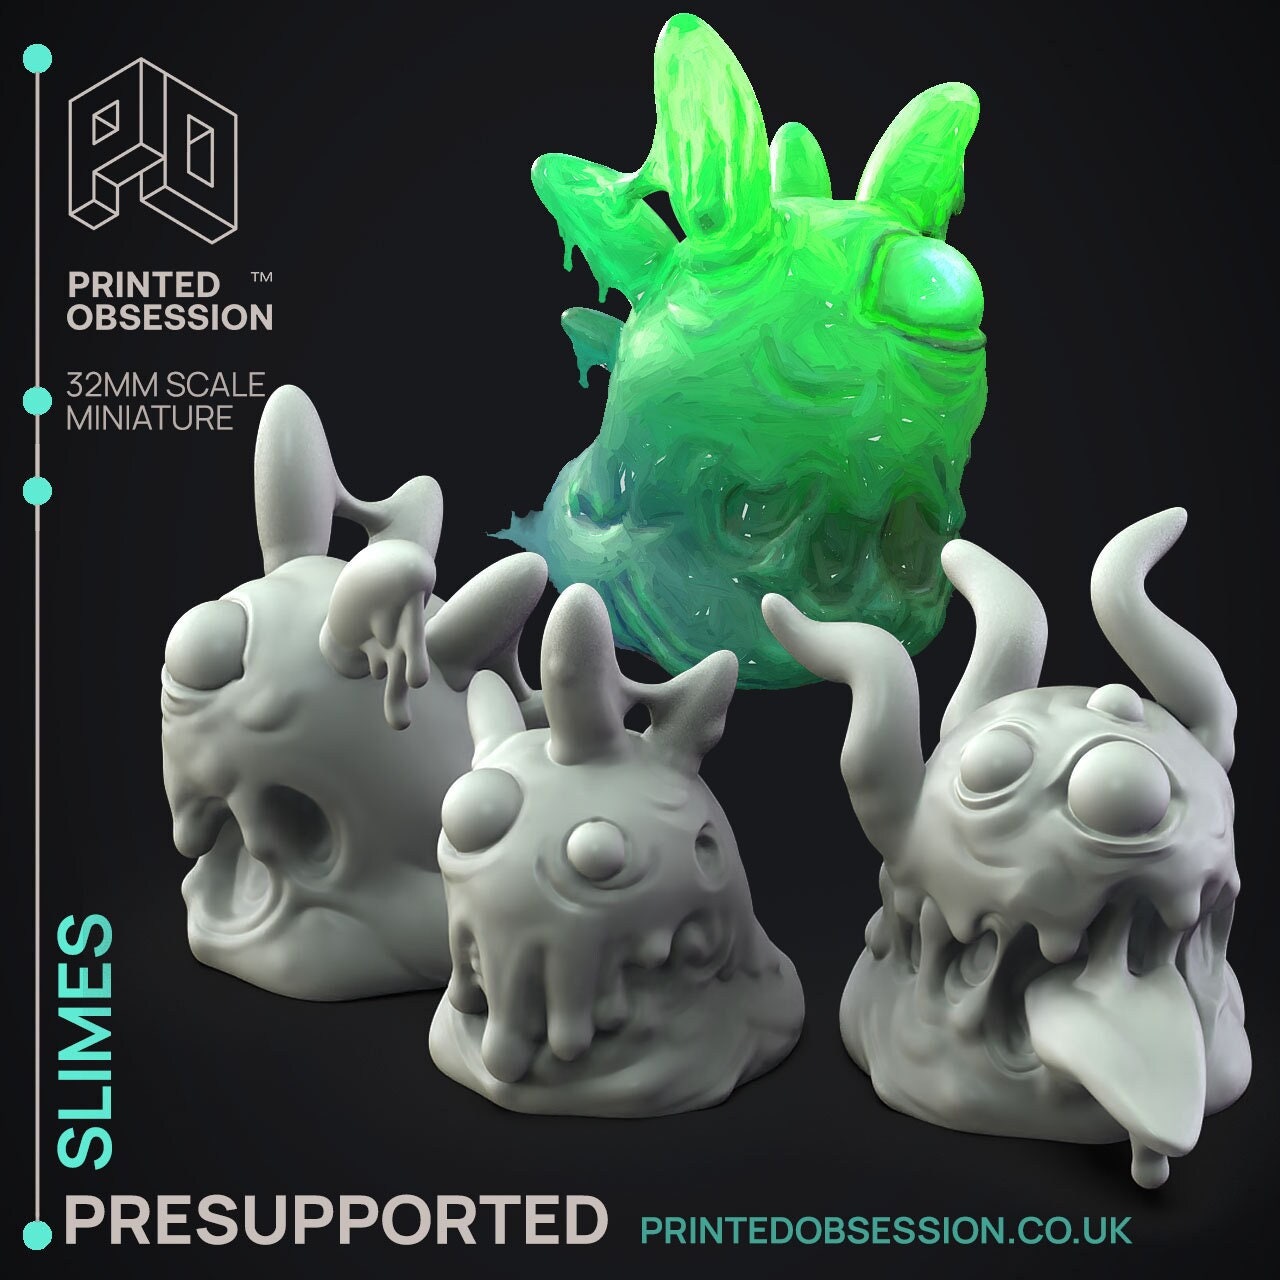 Collections – Resin Obsession